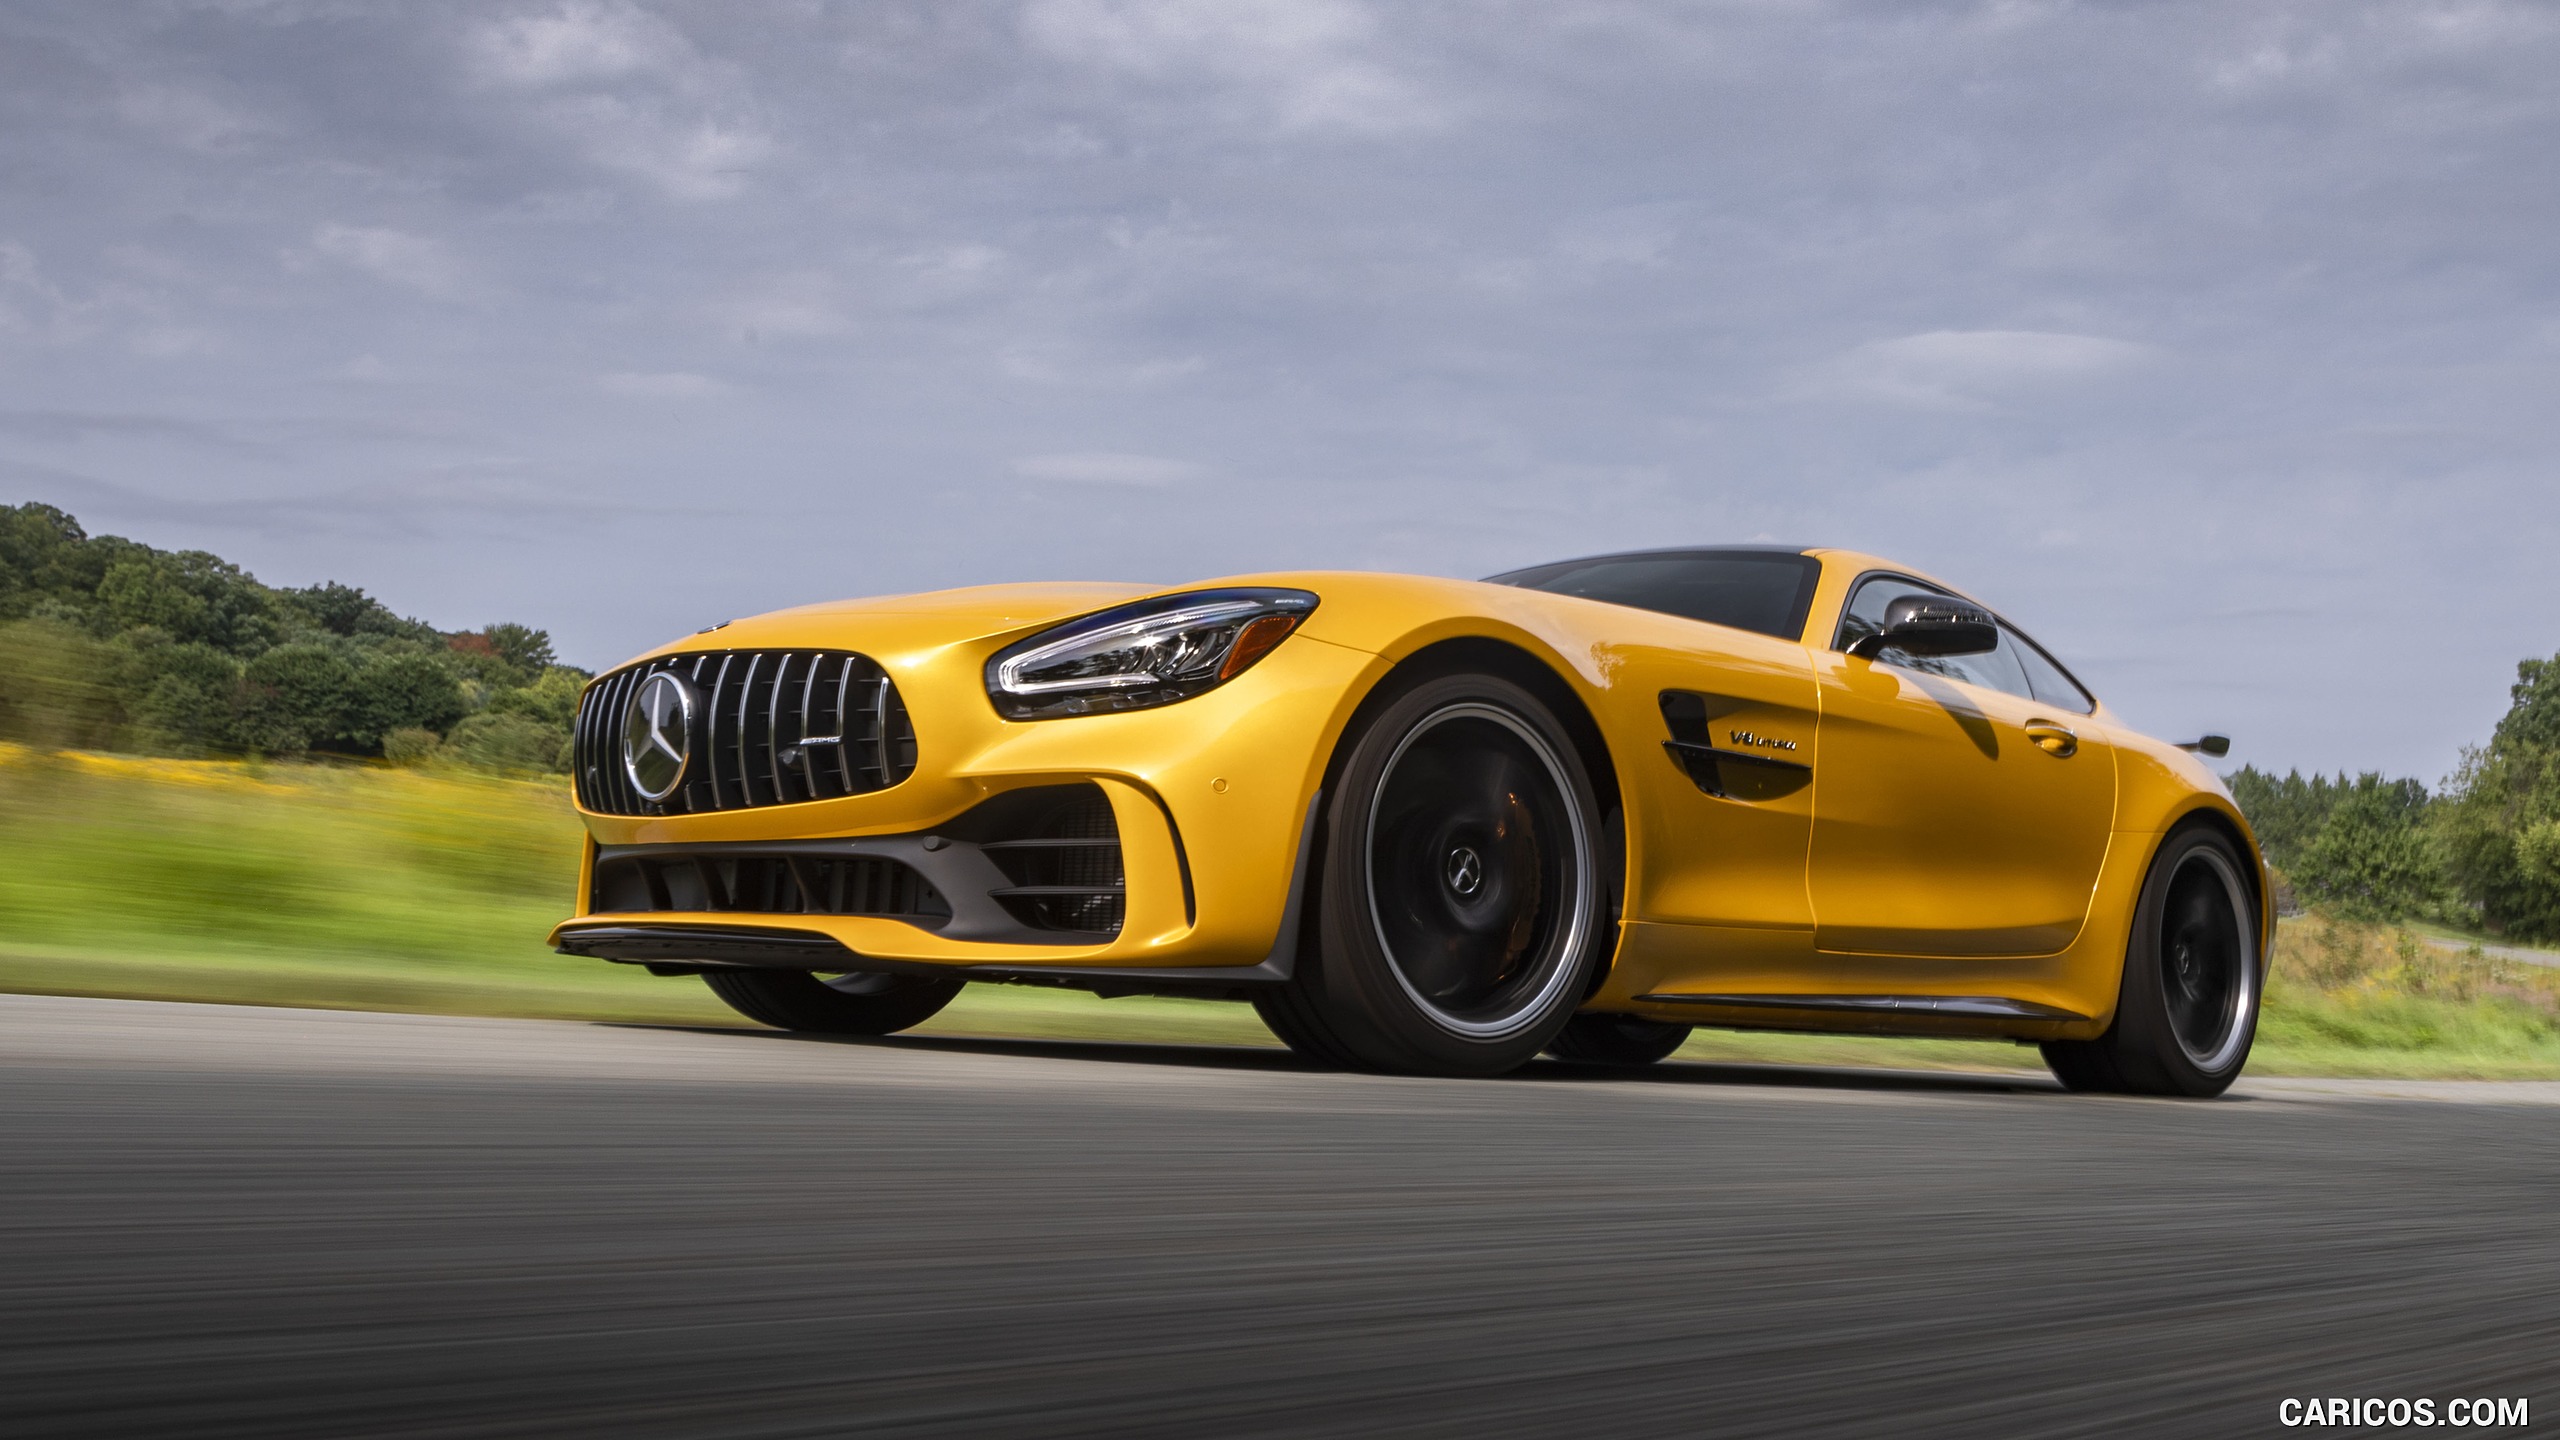 2020 Mercedes-AMG GT R Coupe (US-Spec) - Front Three-Quarter, #270 of 328